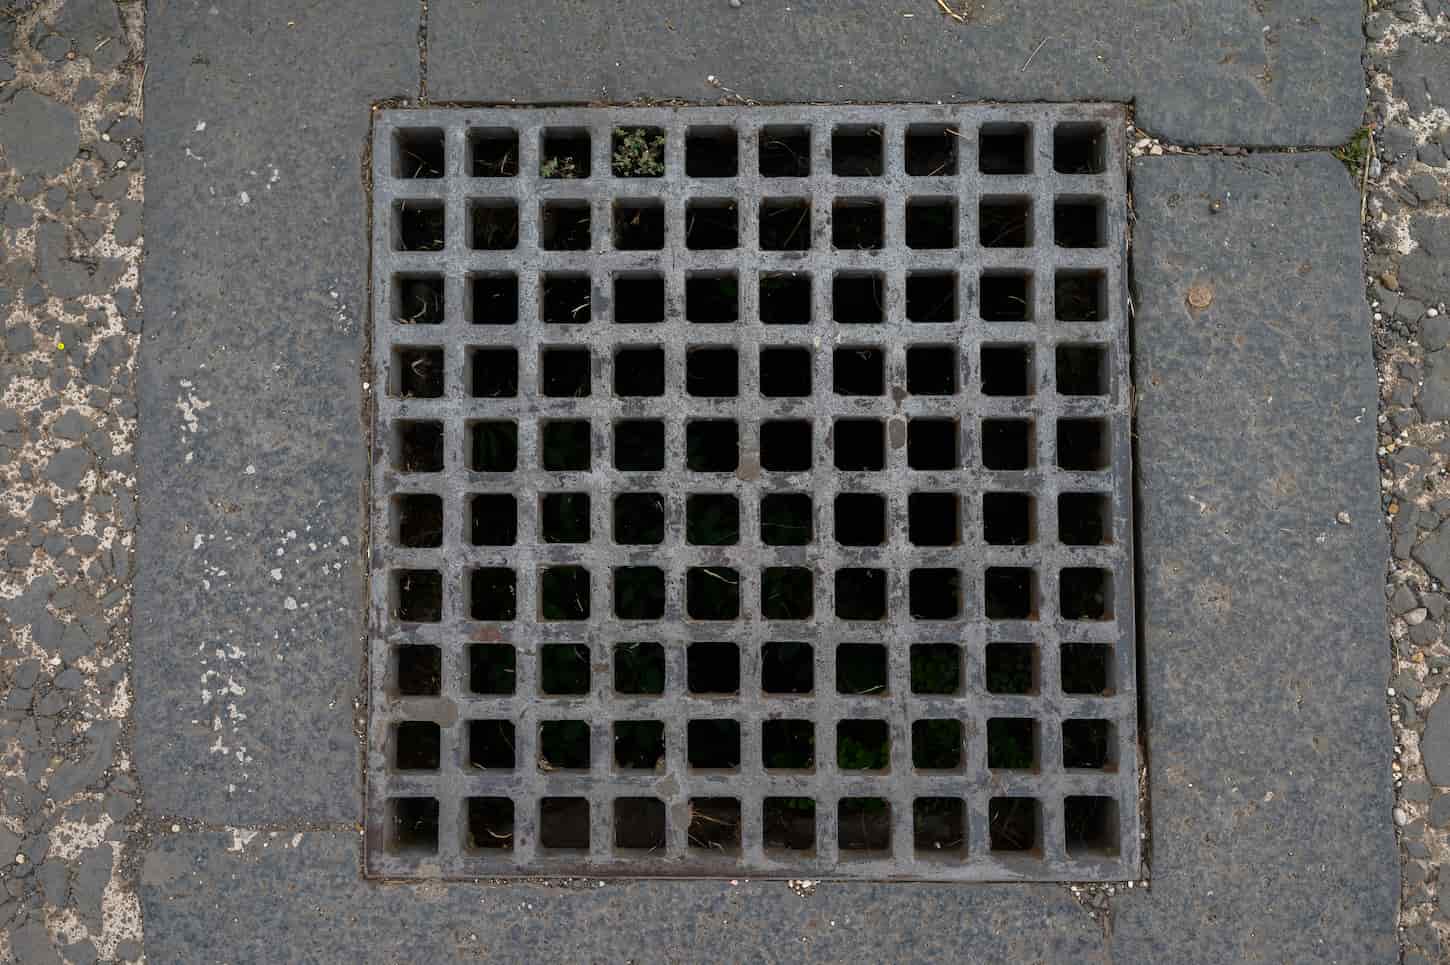 9 Types of Yard Drains For Your Home and Garden